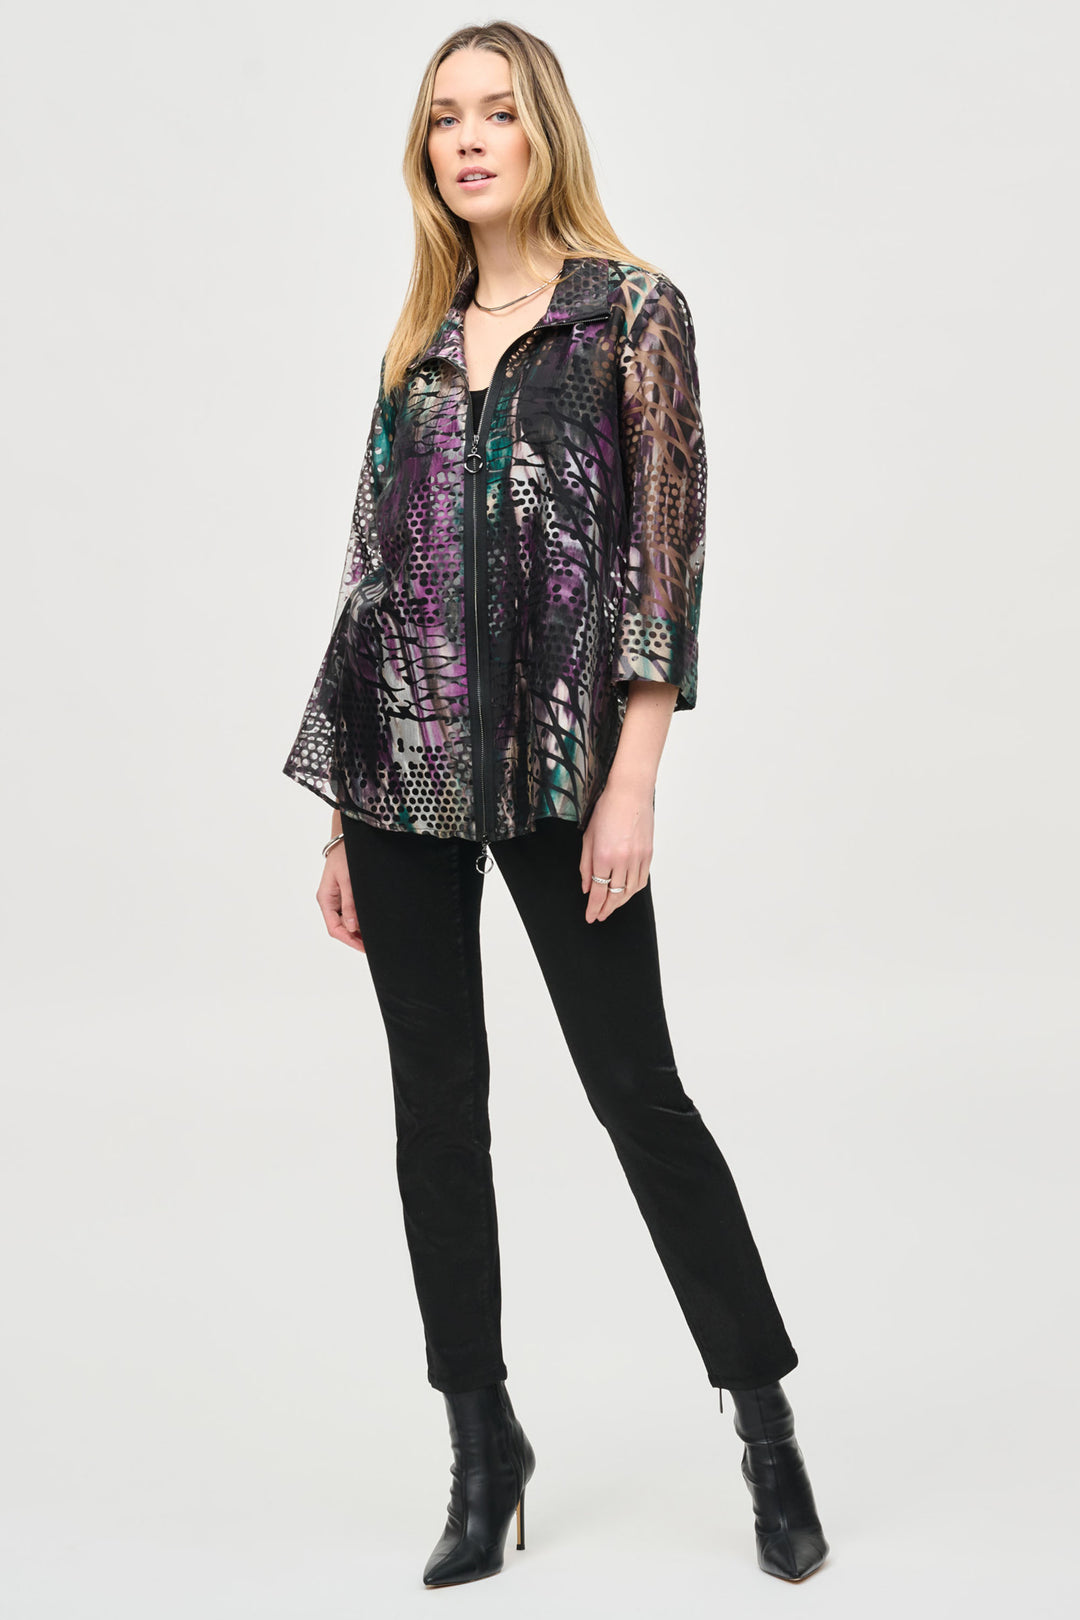 Joseph Ribkoff Fall 2024  This slim fit jean combines traditional denim elements with a trendy foiled print for a versatile look. Made with a comfortable cotton blend, it can be dressed up or down for any occasion. 